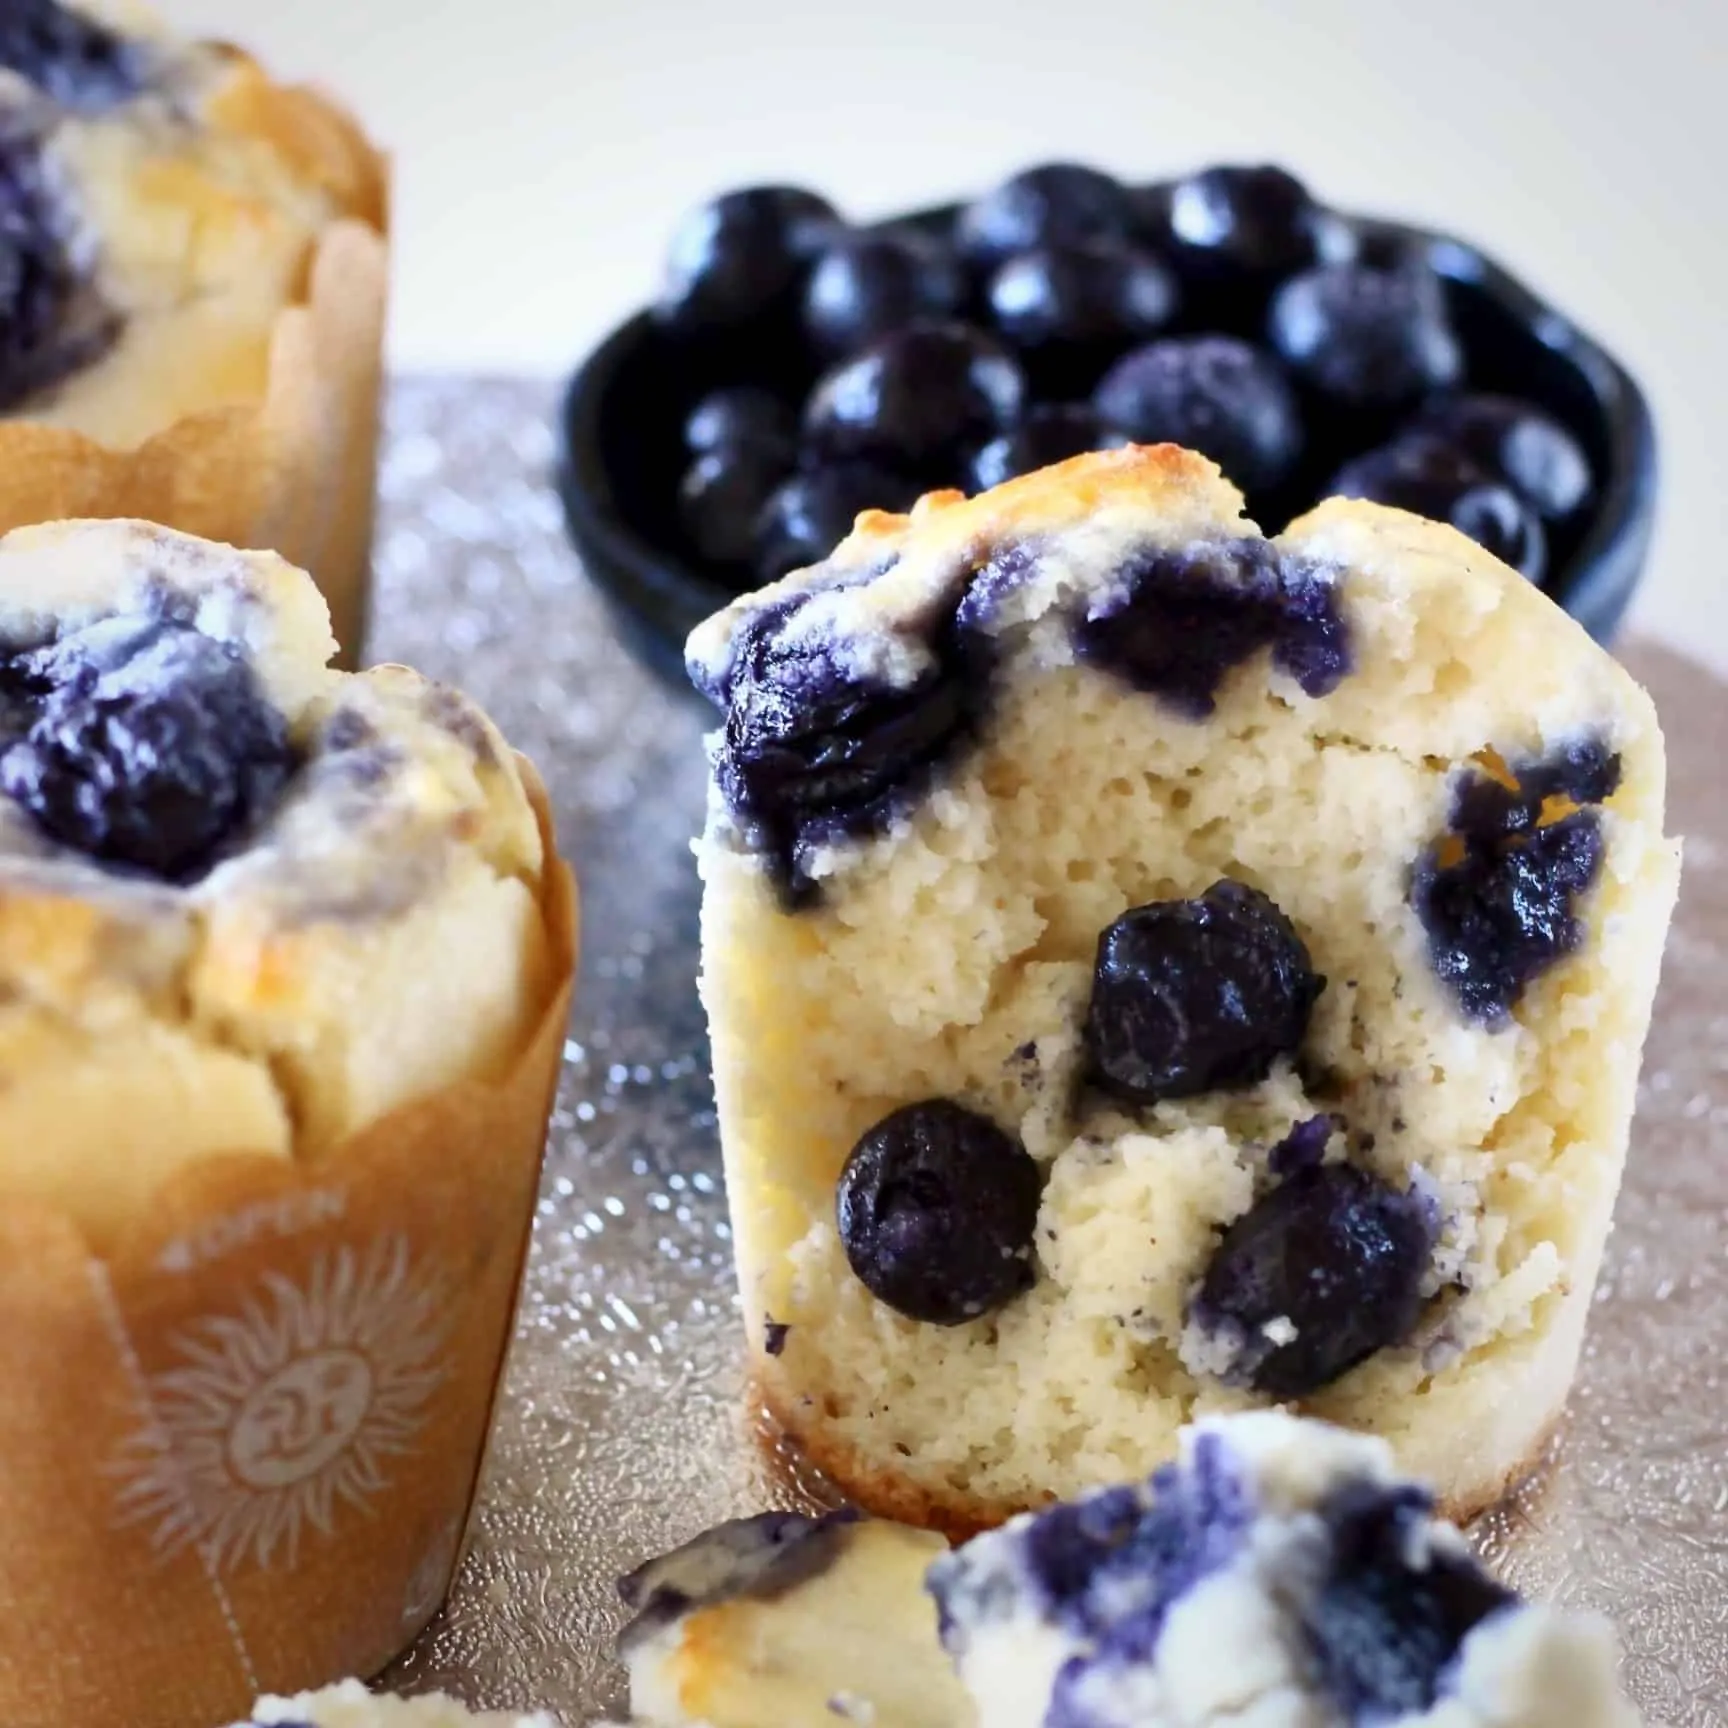 Three vegan blueberry muffins with a bite taken out of one with a bowl of fresh blueberries in the background